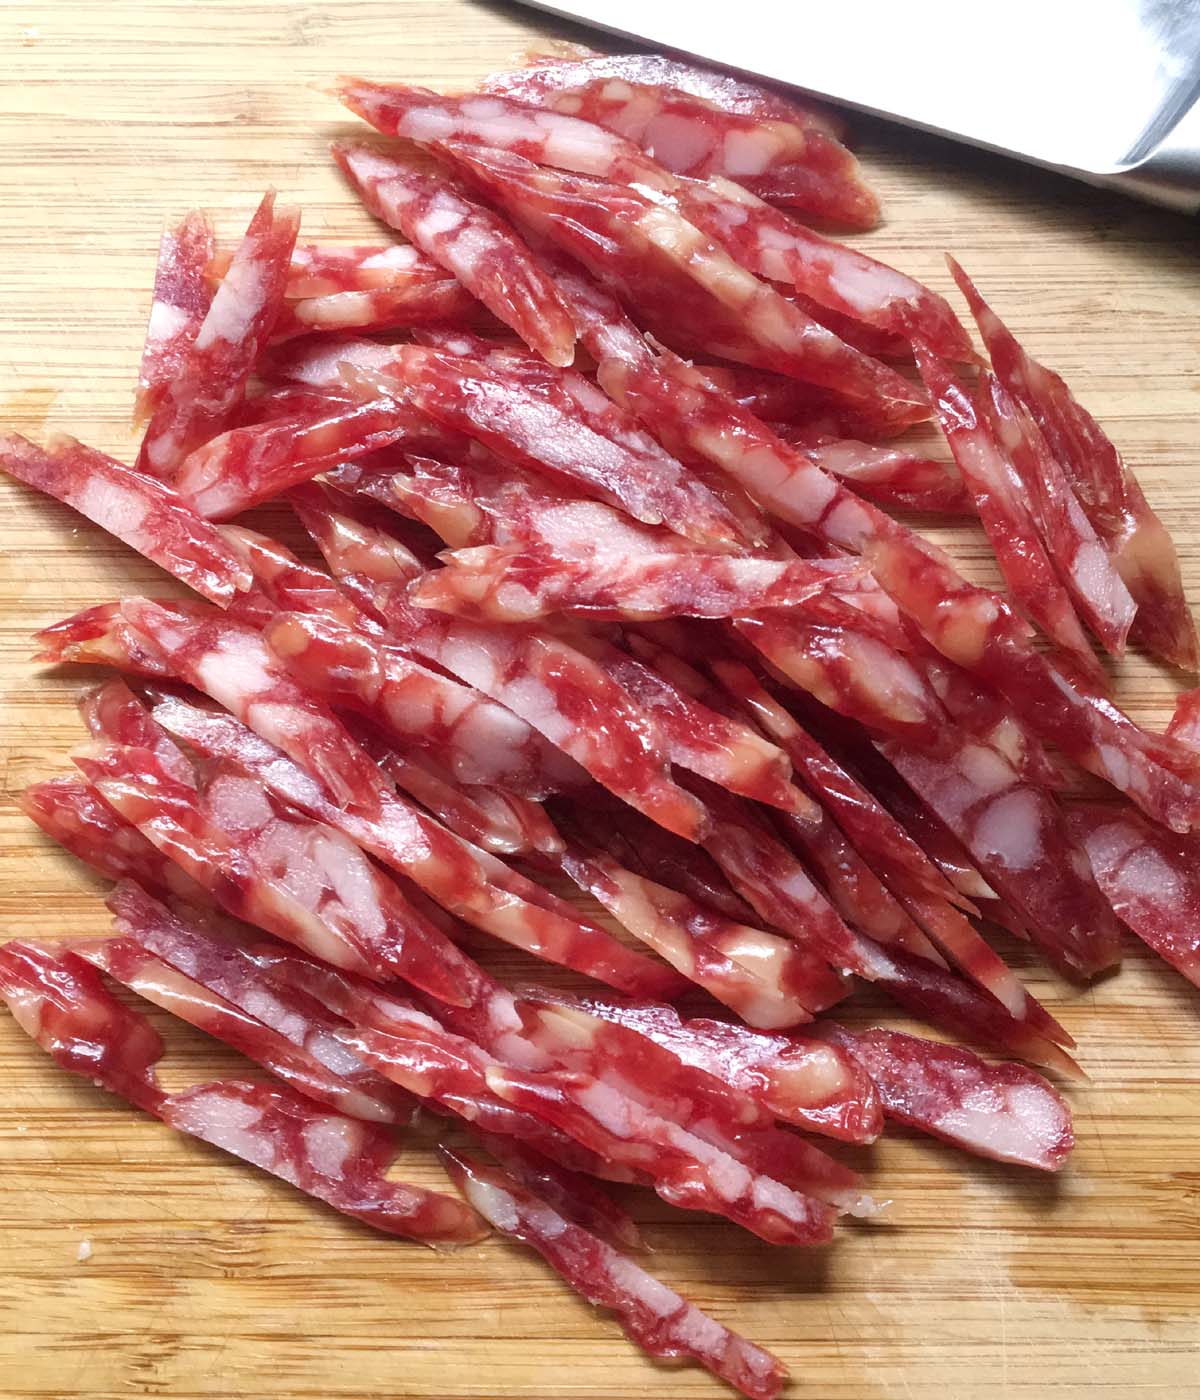 Red sausage cut into strips on a wooden cutting board.